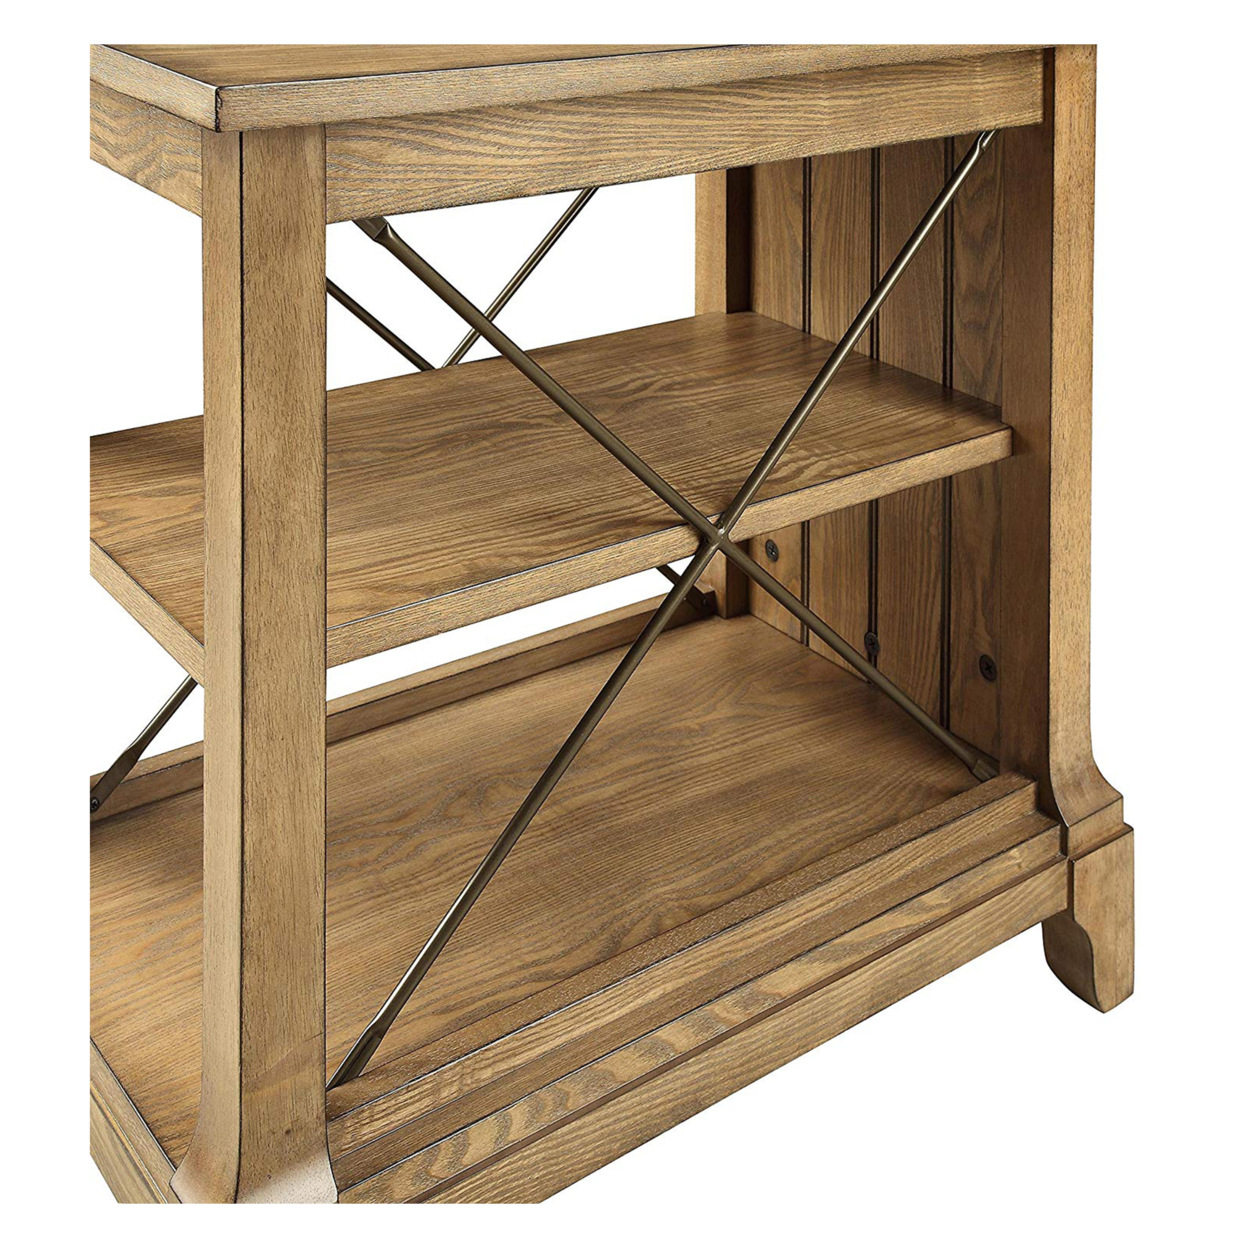 Wooden Side Table With 2 Compartments, Oak Brown- Saltoro Sherpi